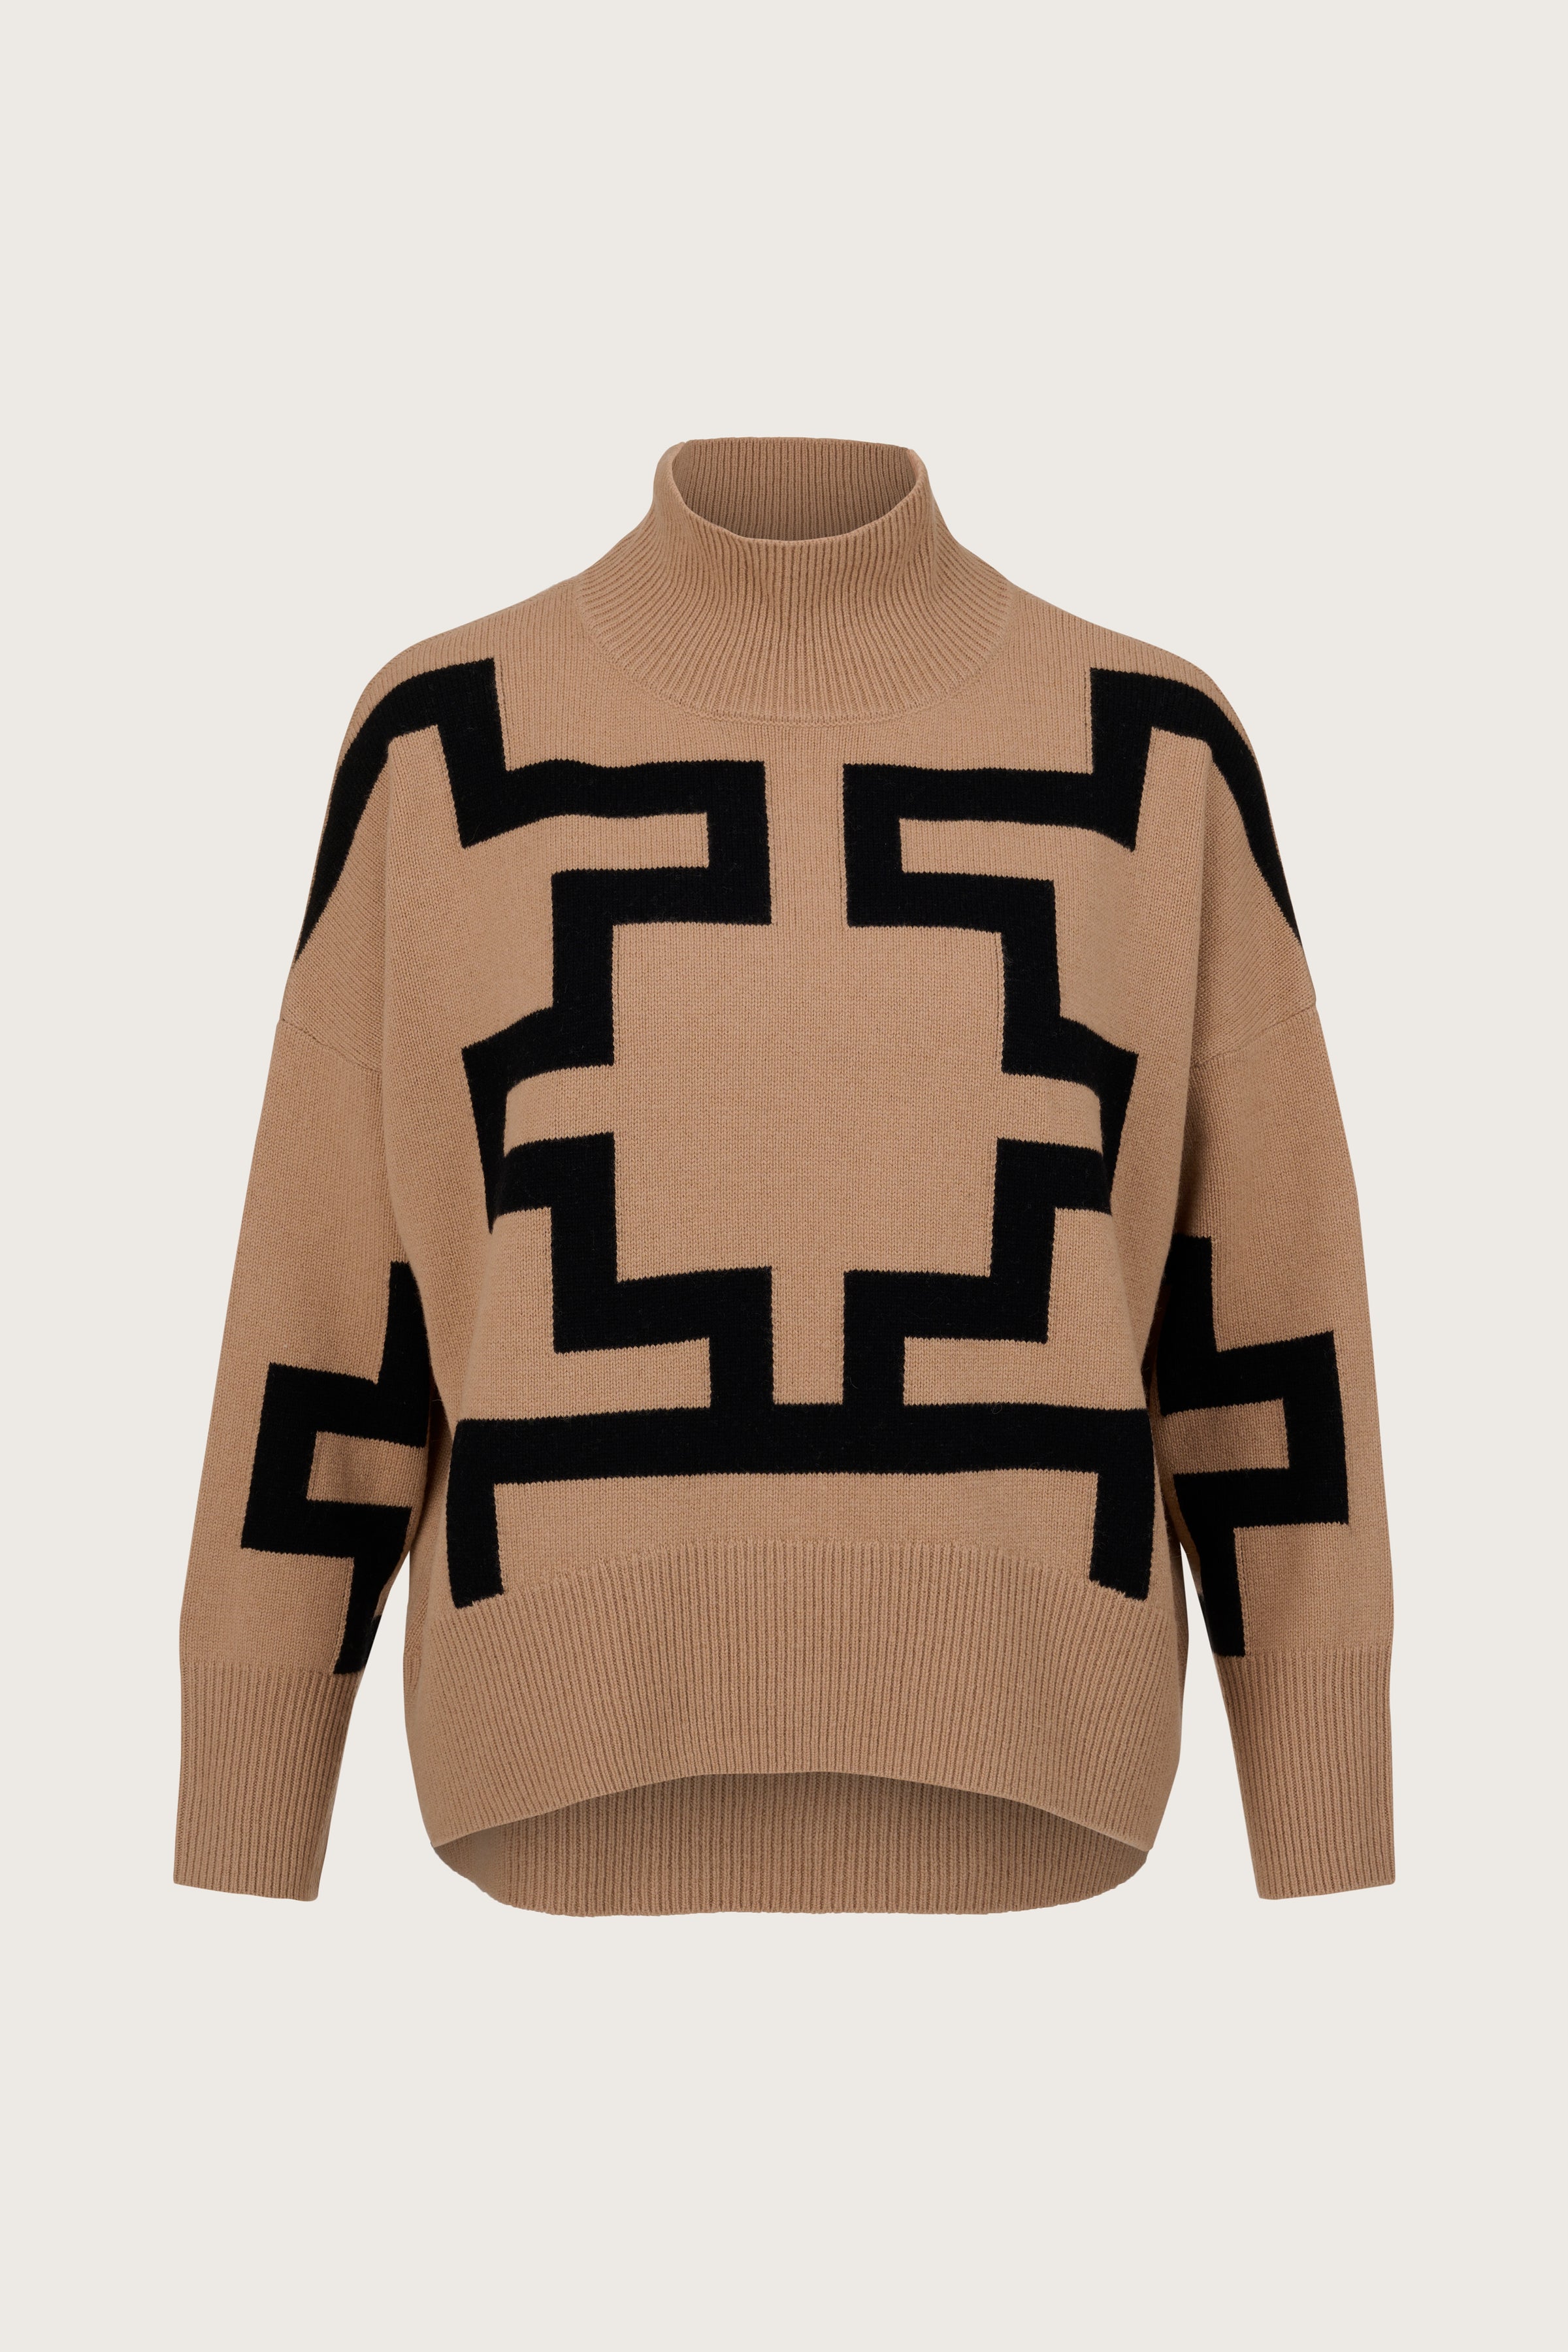 Caramel brown turtleneck wool blend jumper with black geometric knitted pattern all over